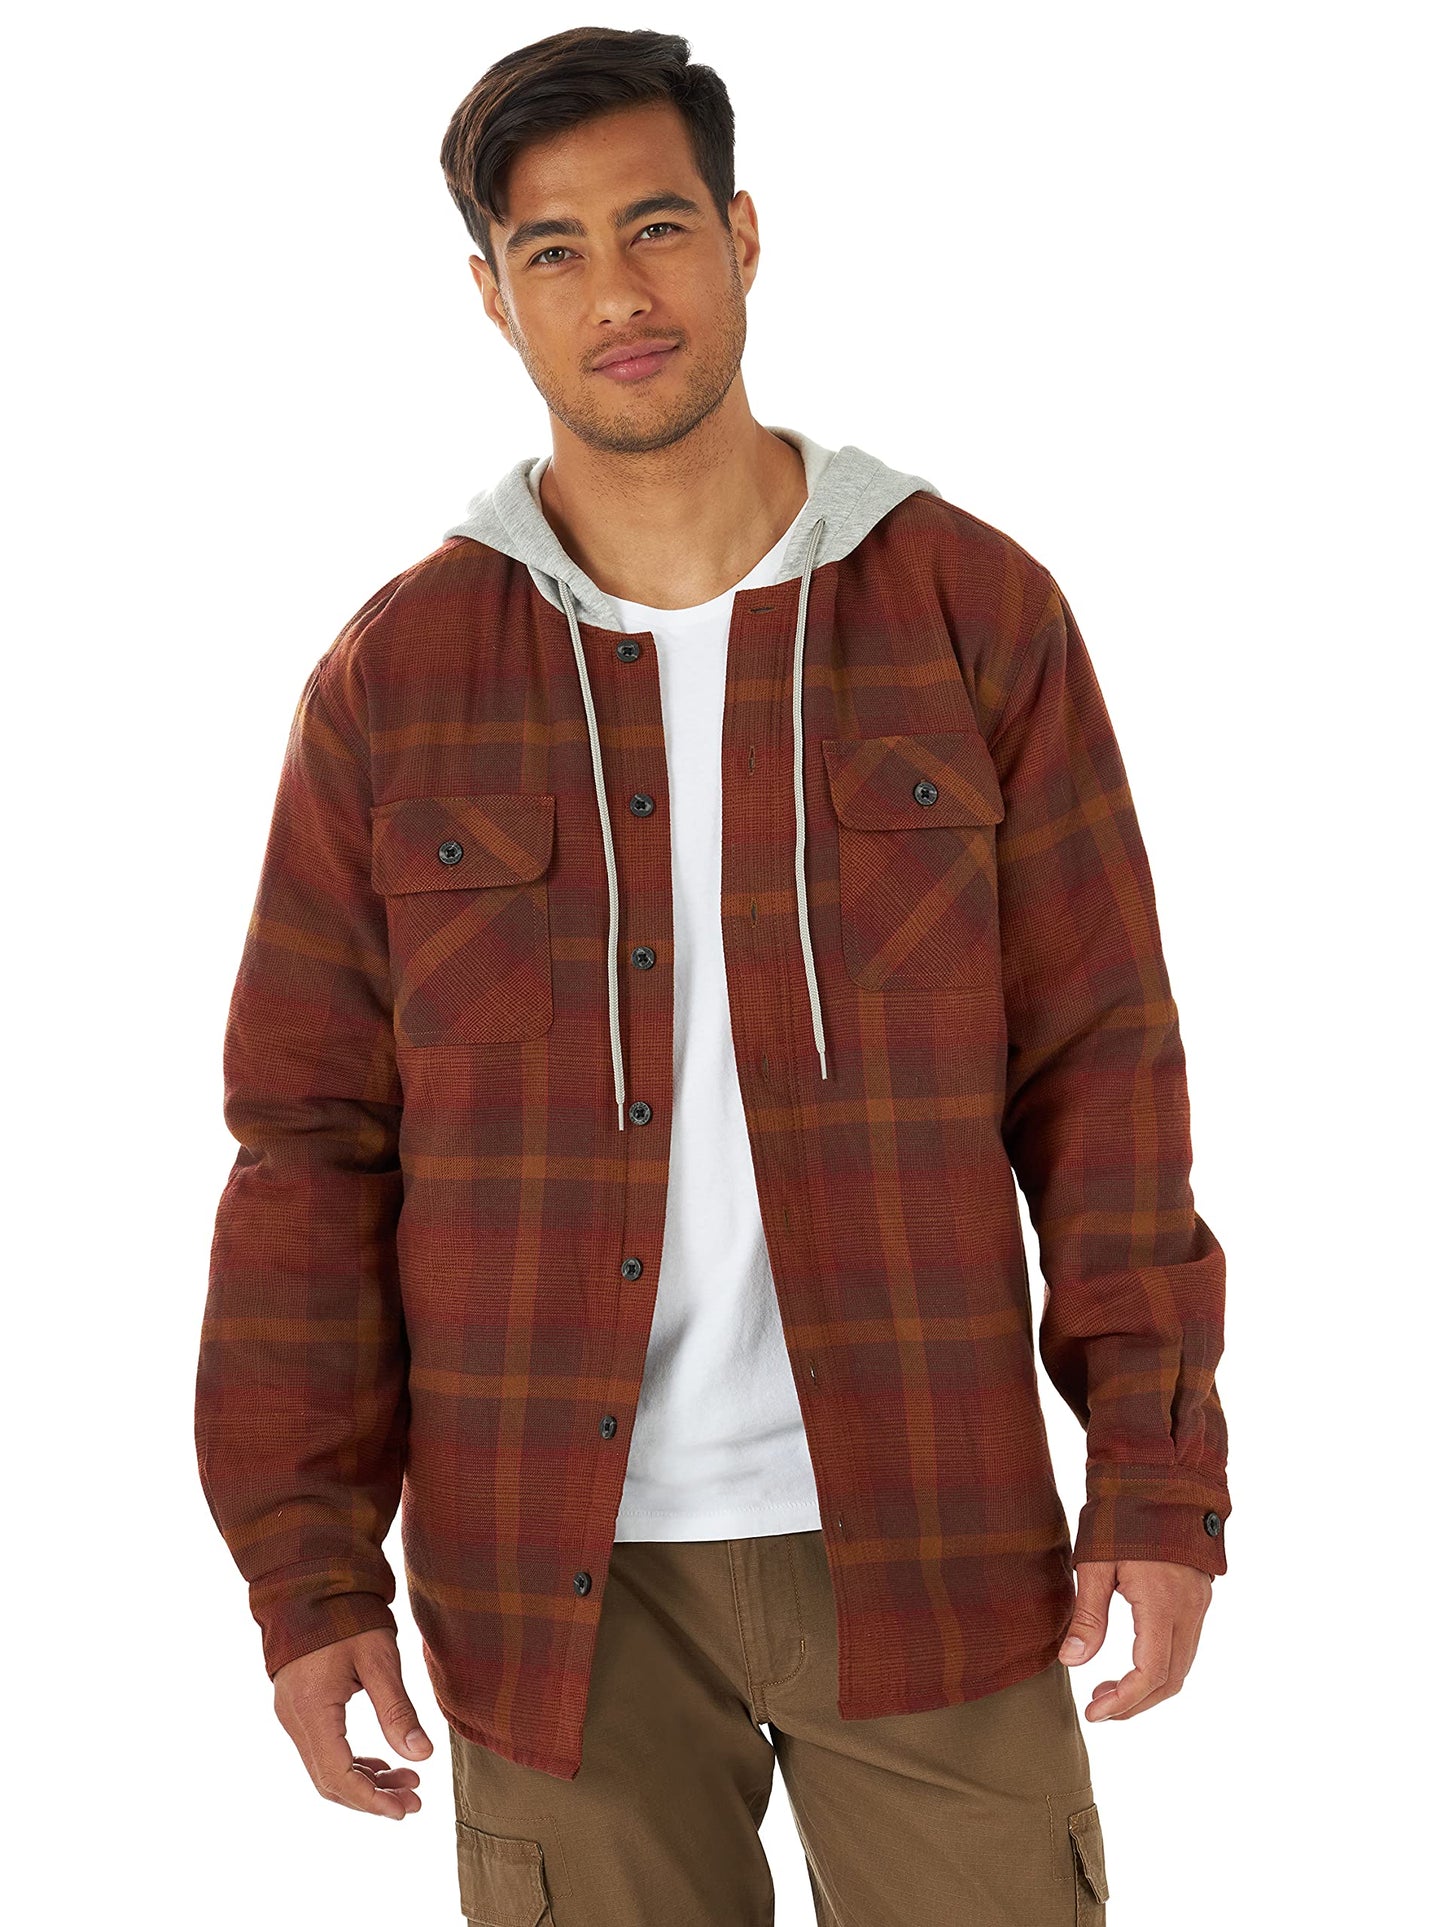 Wrangler Authentics Men's Long Sleeve Quilted Lined Flannel Shirt Jacket with Hood, Toffee, Large